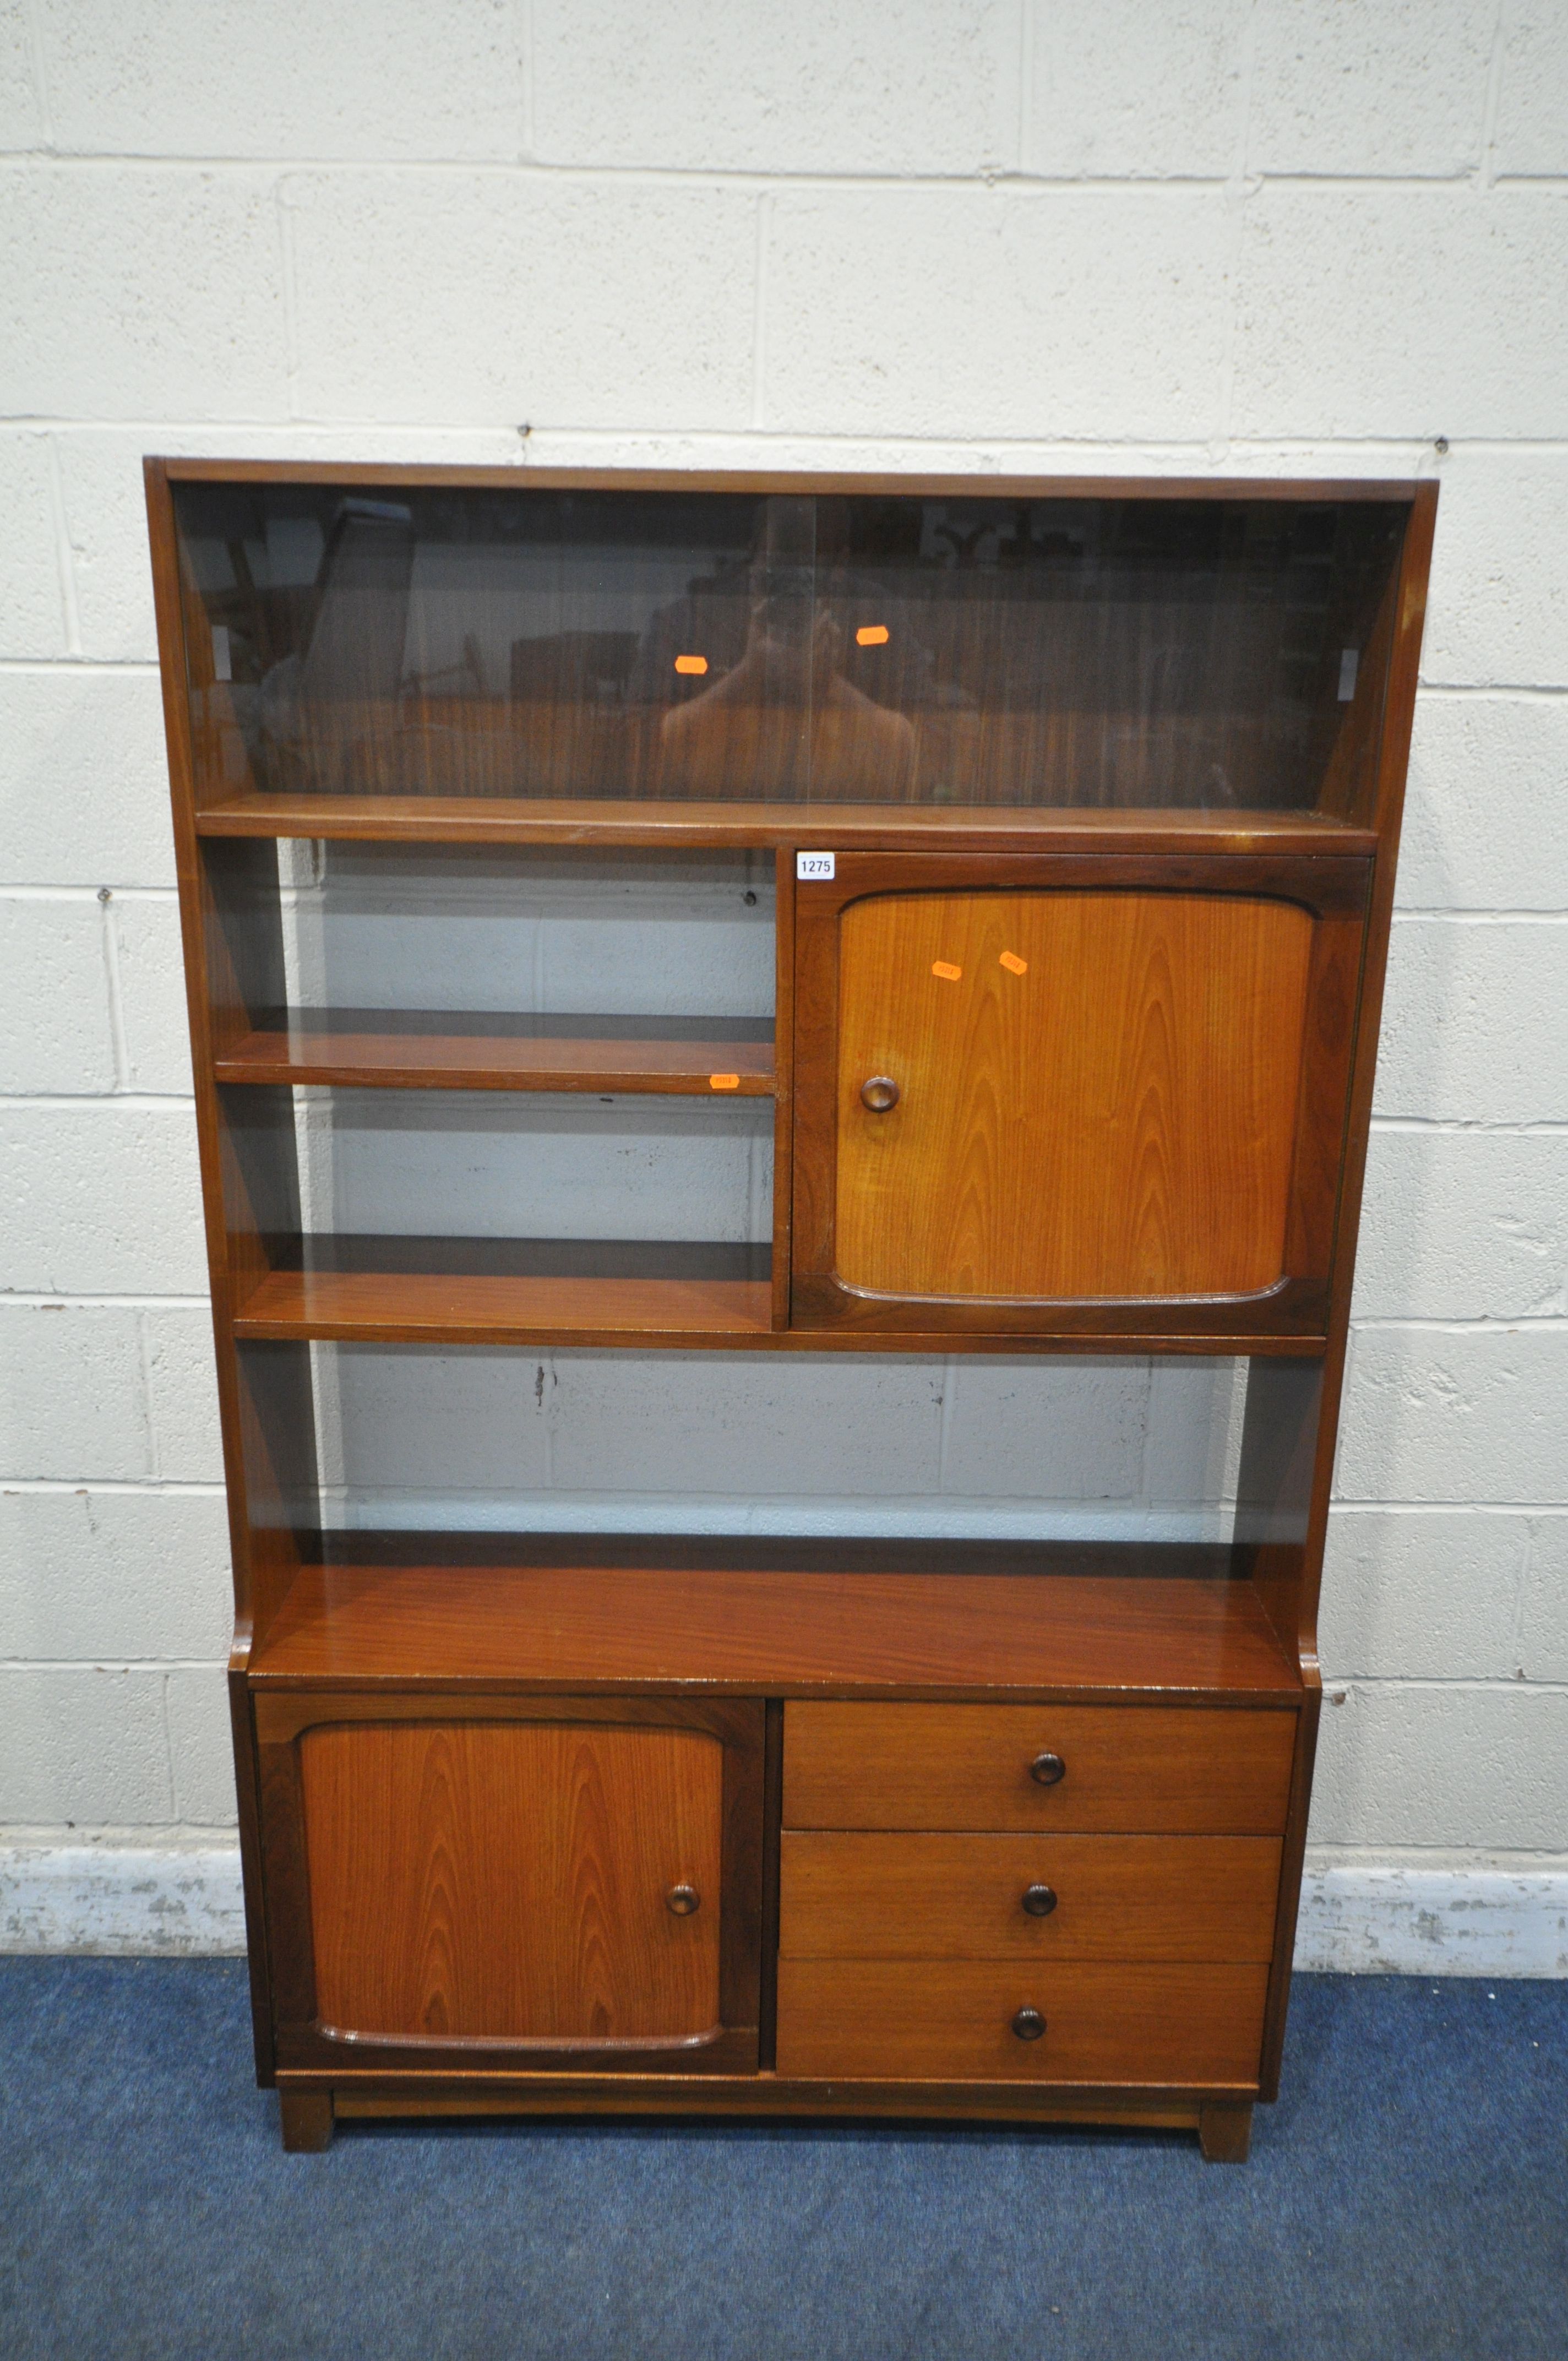 STATEROOM BY STONEHILL, A MID CENTURY TEAK BOOKCASE, with double glazed sliding doors, an